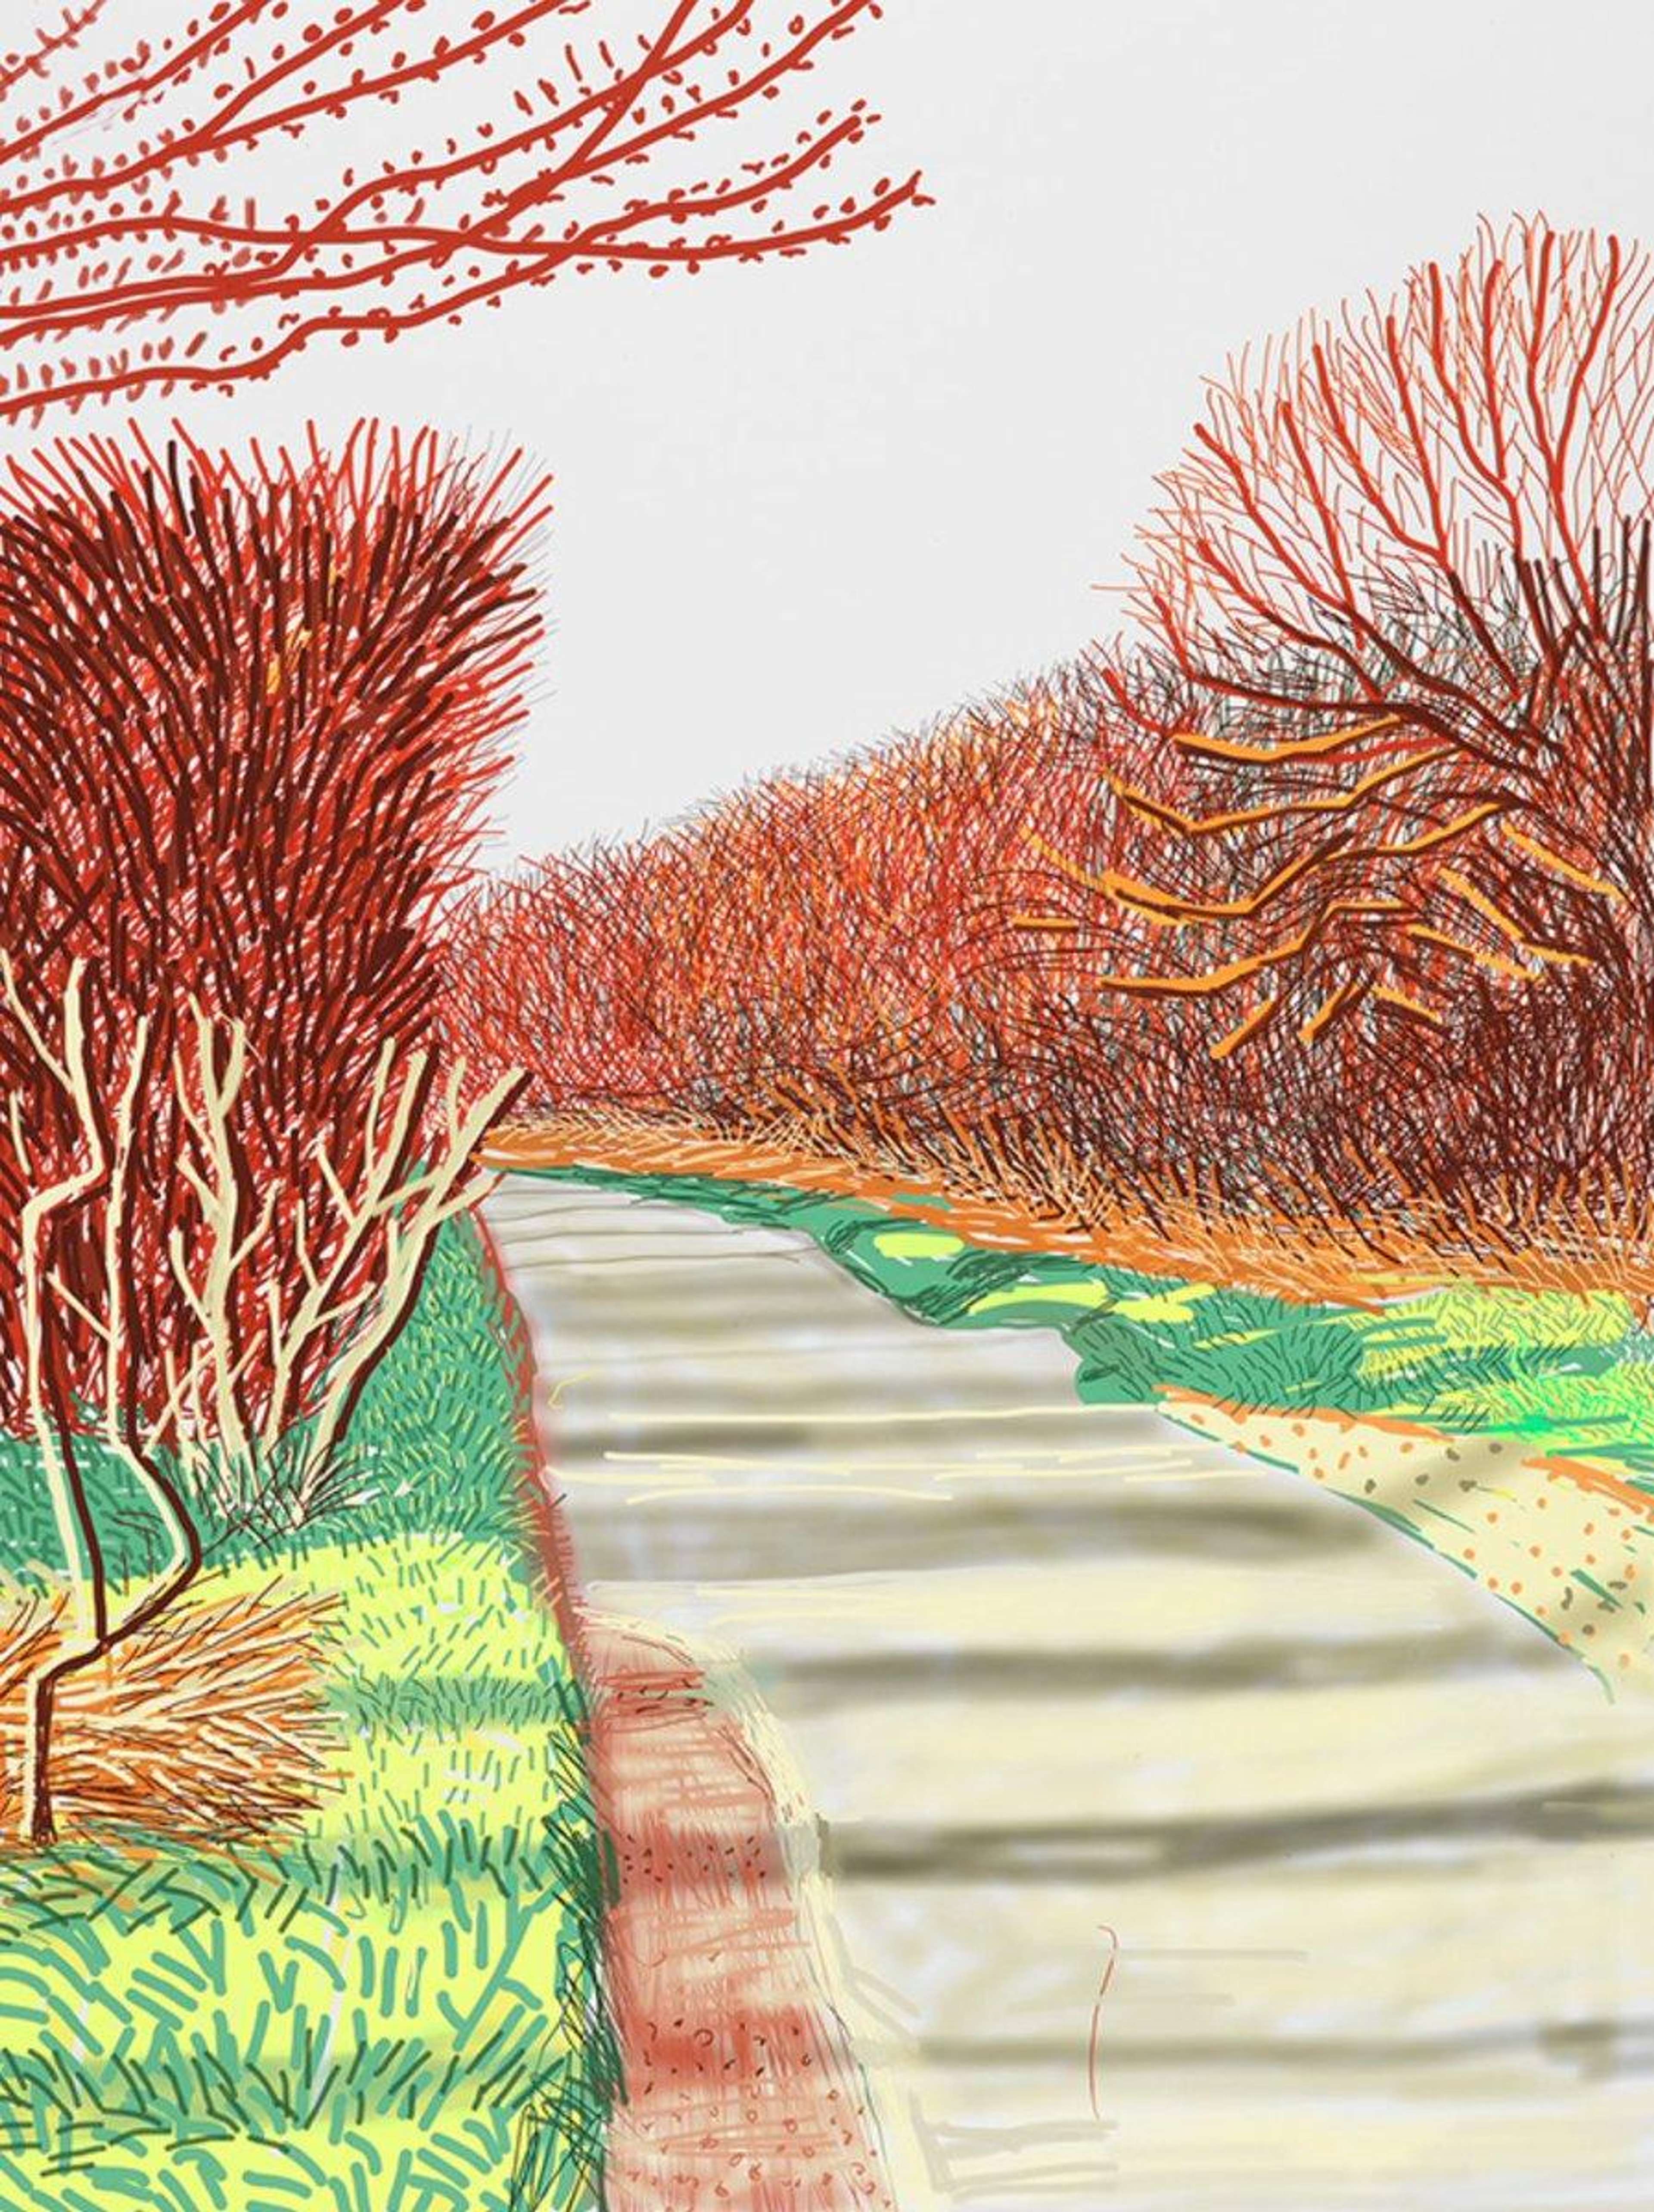 An autumnal landscape by David Hockney, showing orange tree trunks on either side of a path.